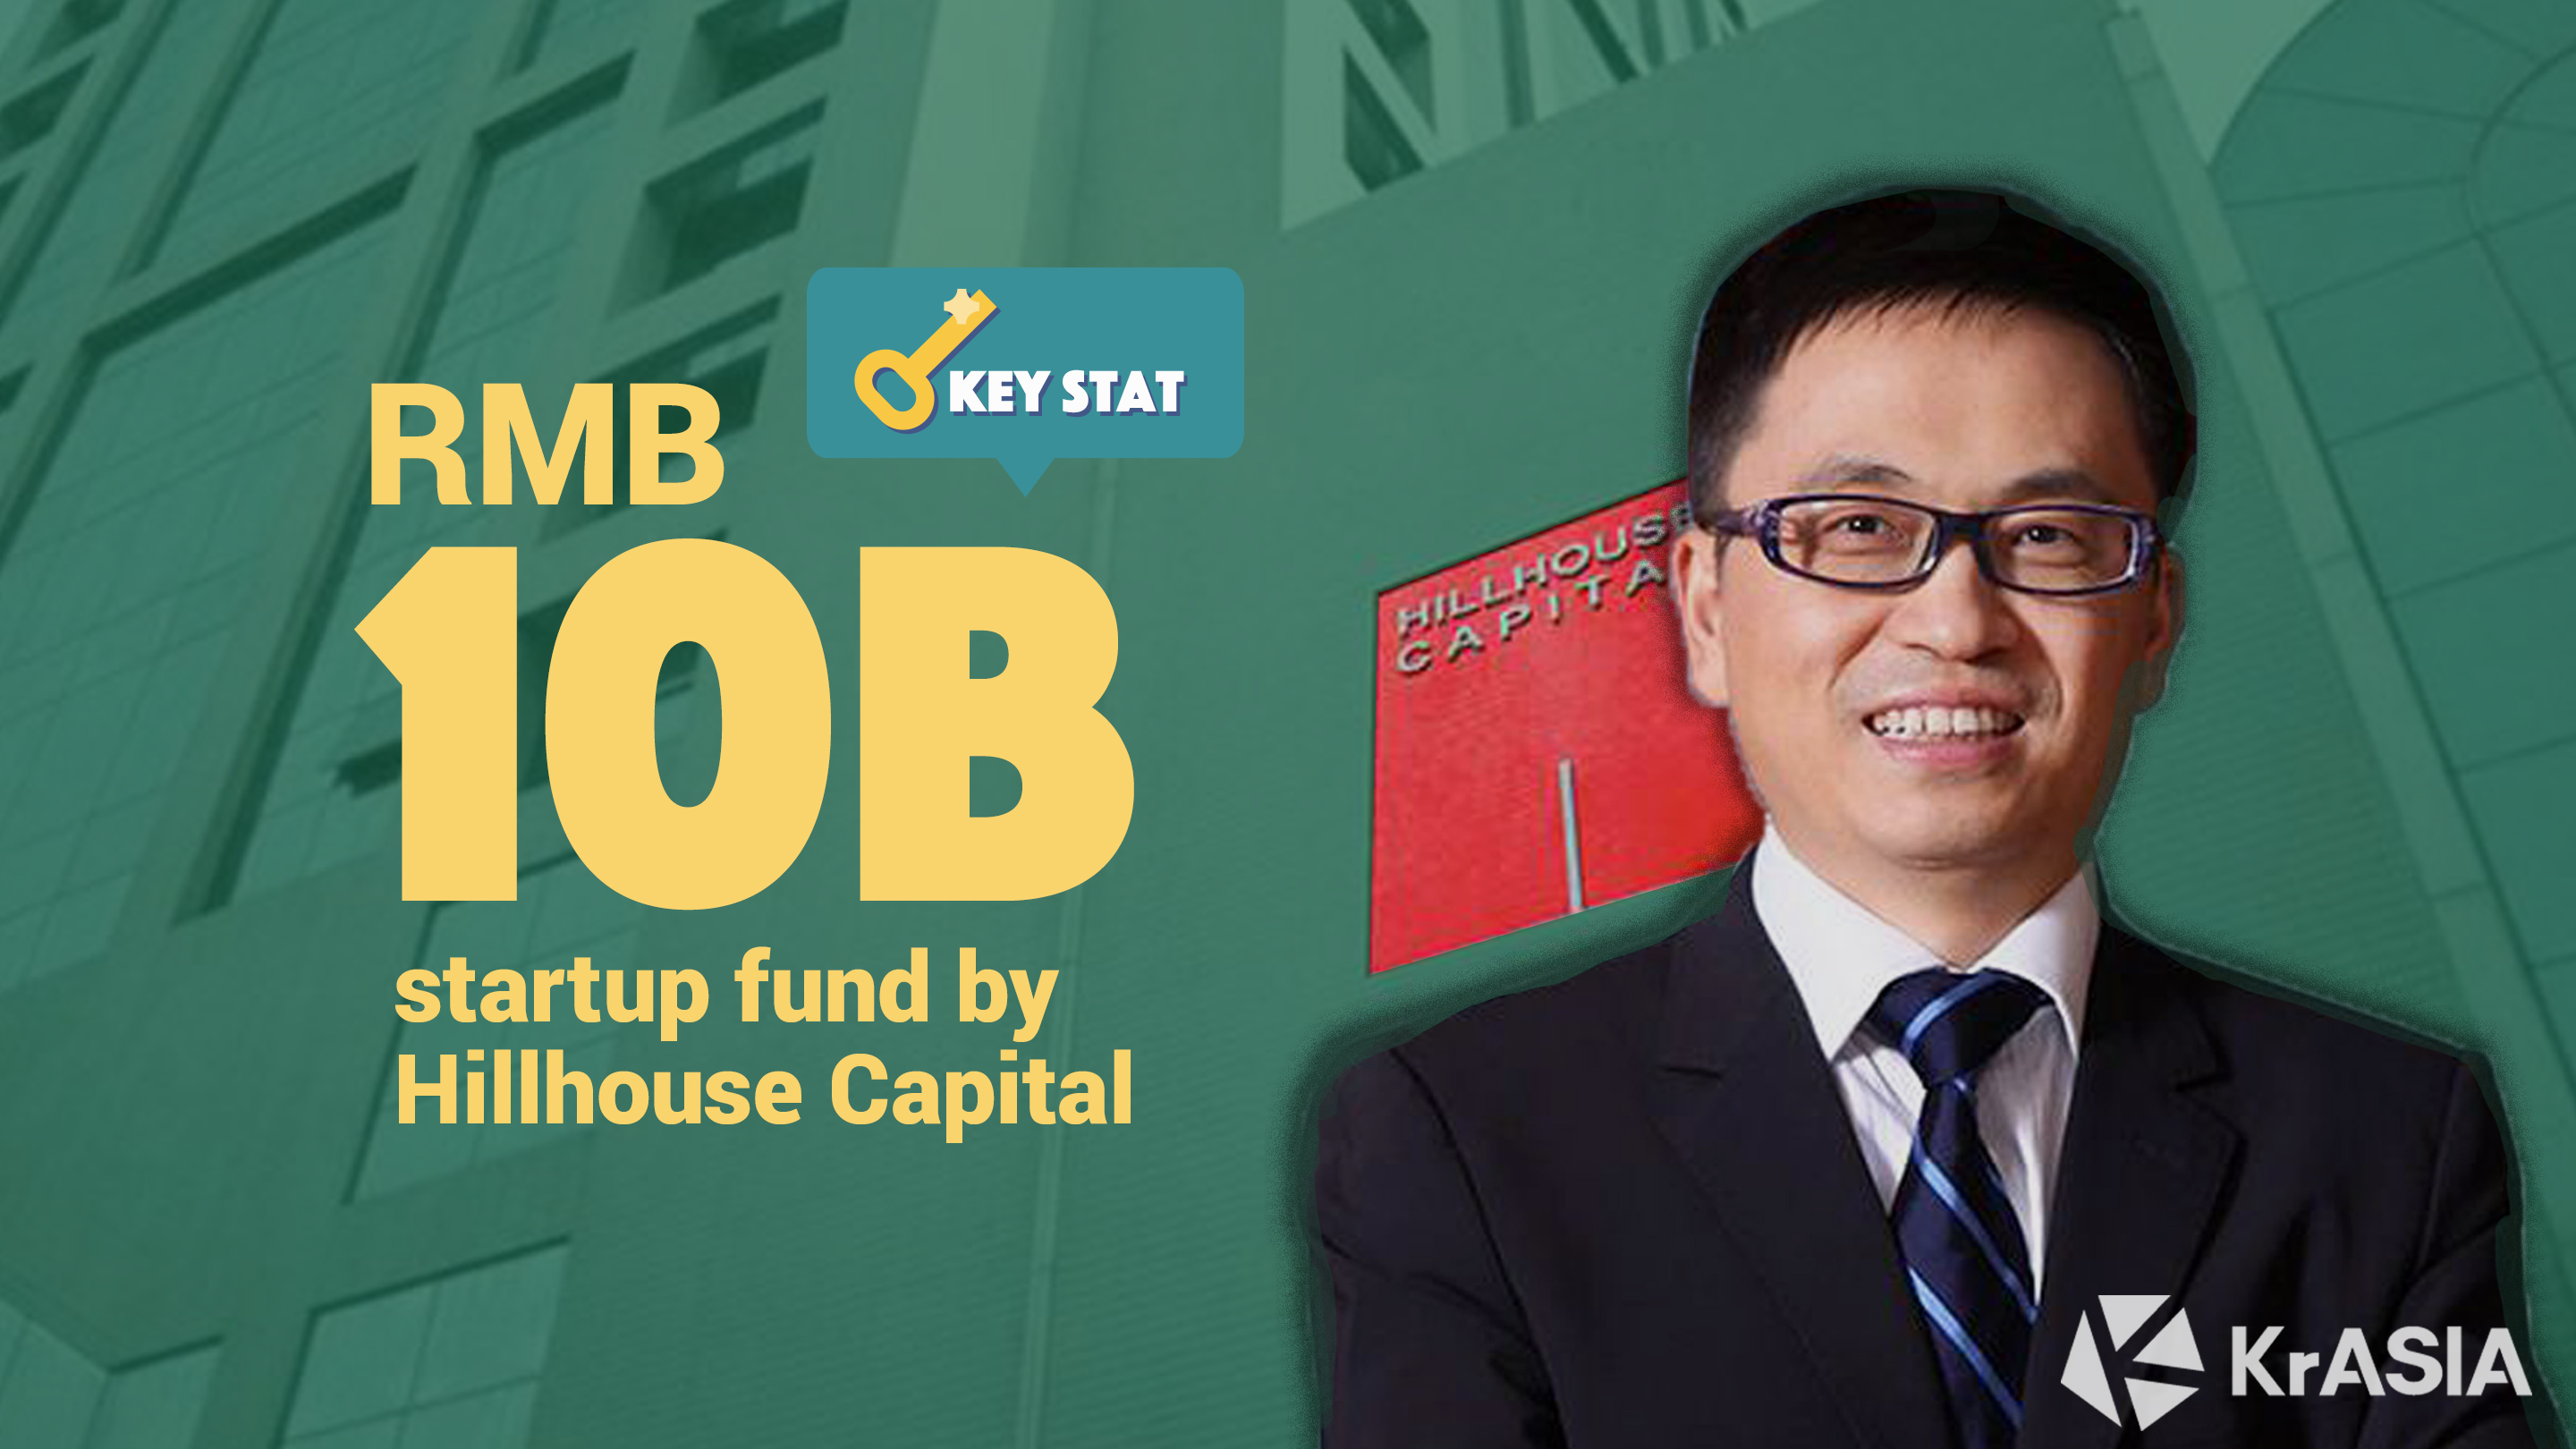 KEY STAT | Hillhouse Capital to launch RMB 10 billion fund for startups in China